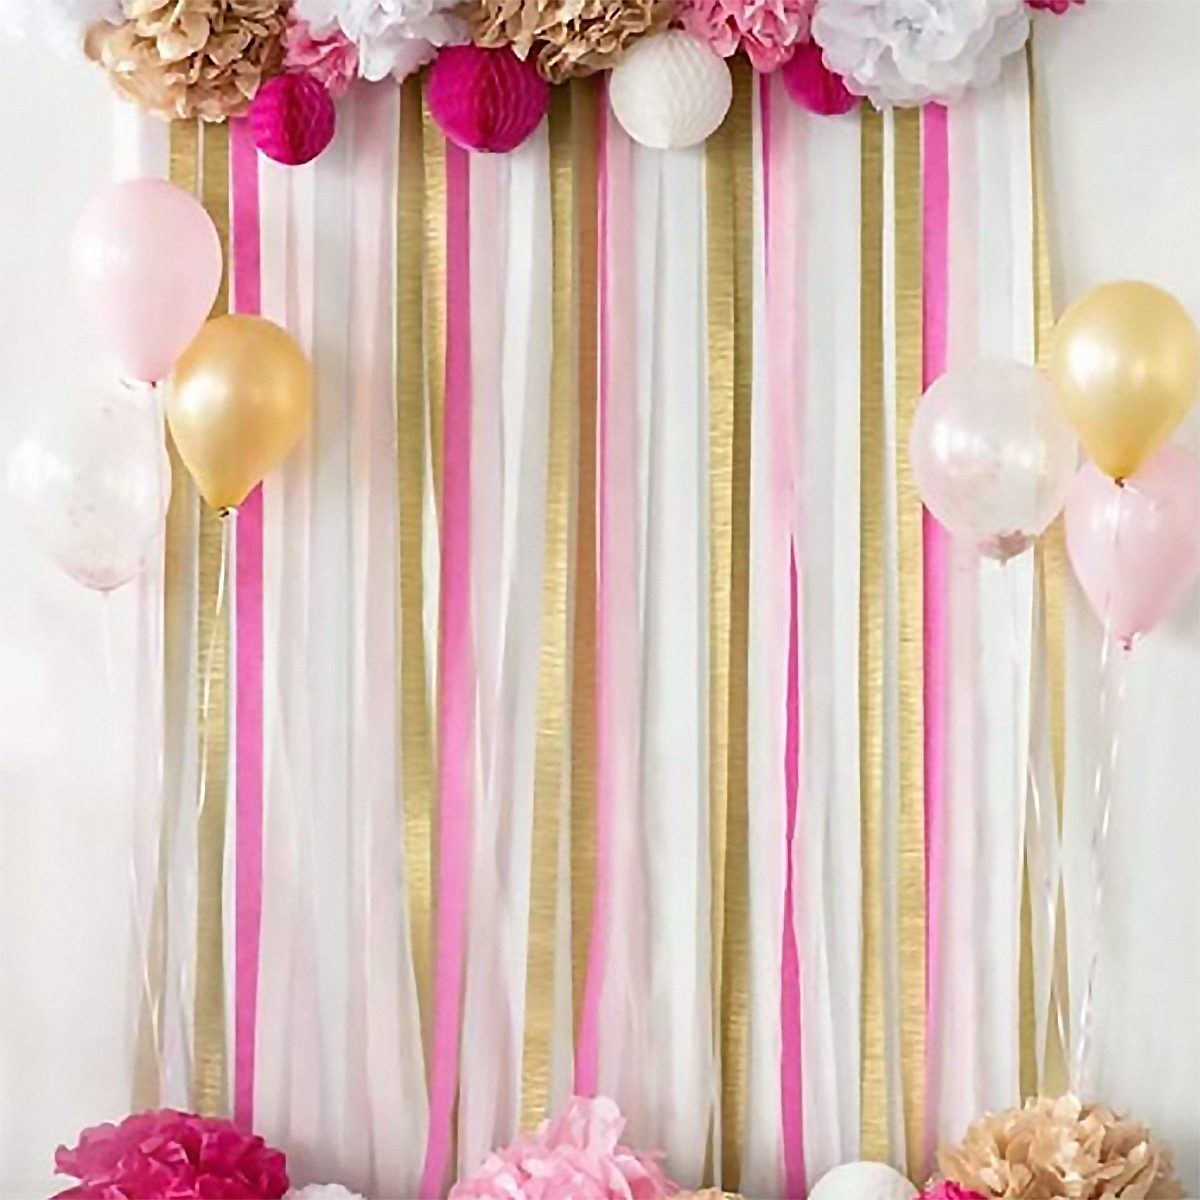 23 Birthday Party Decorations You Can Buy Online | Taste of Home